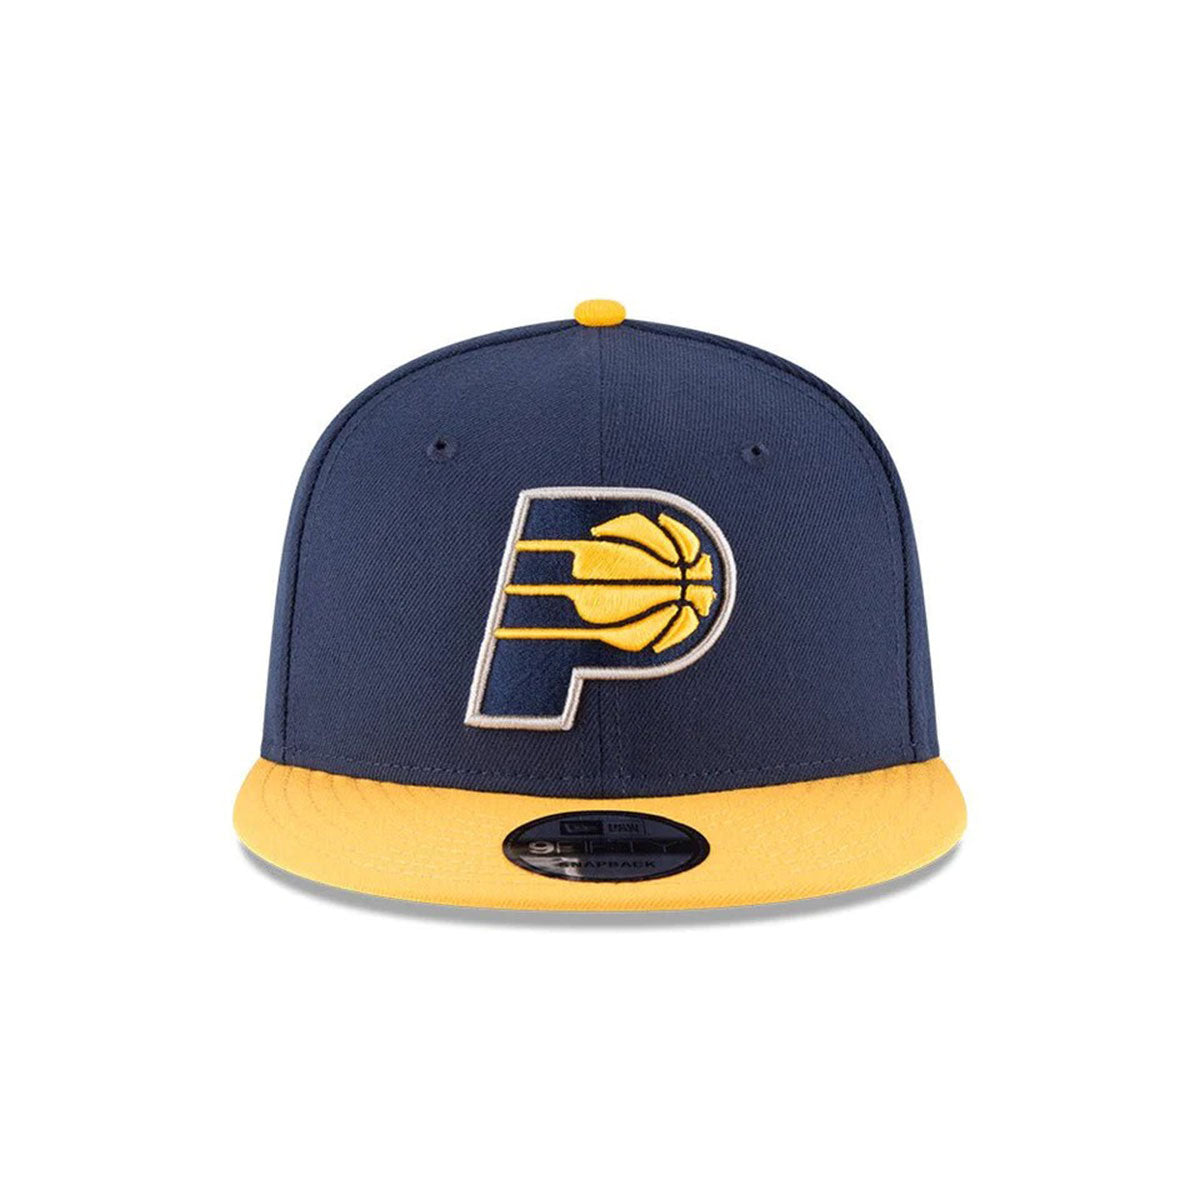 NEW ERA Indiana Pacers - 9FIFTY INDIANA PACERS NAVY/YELLOW【13552034】